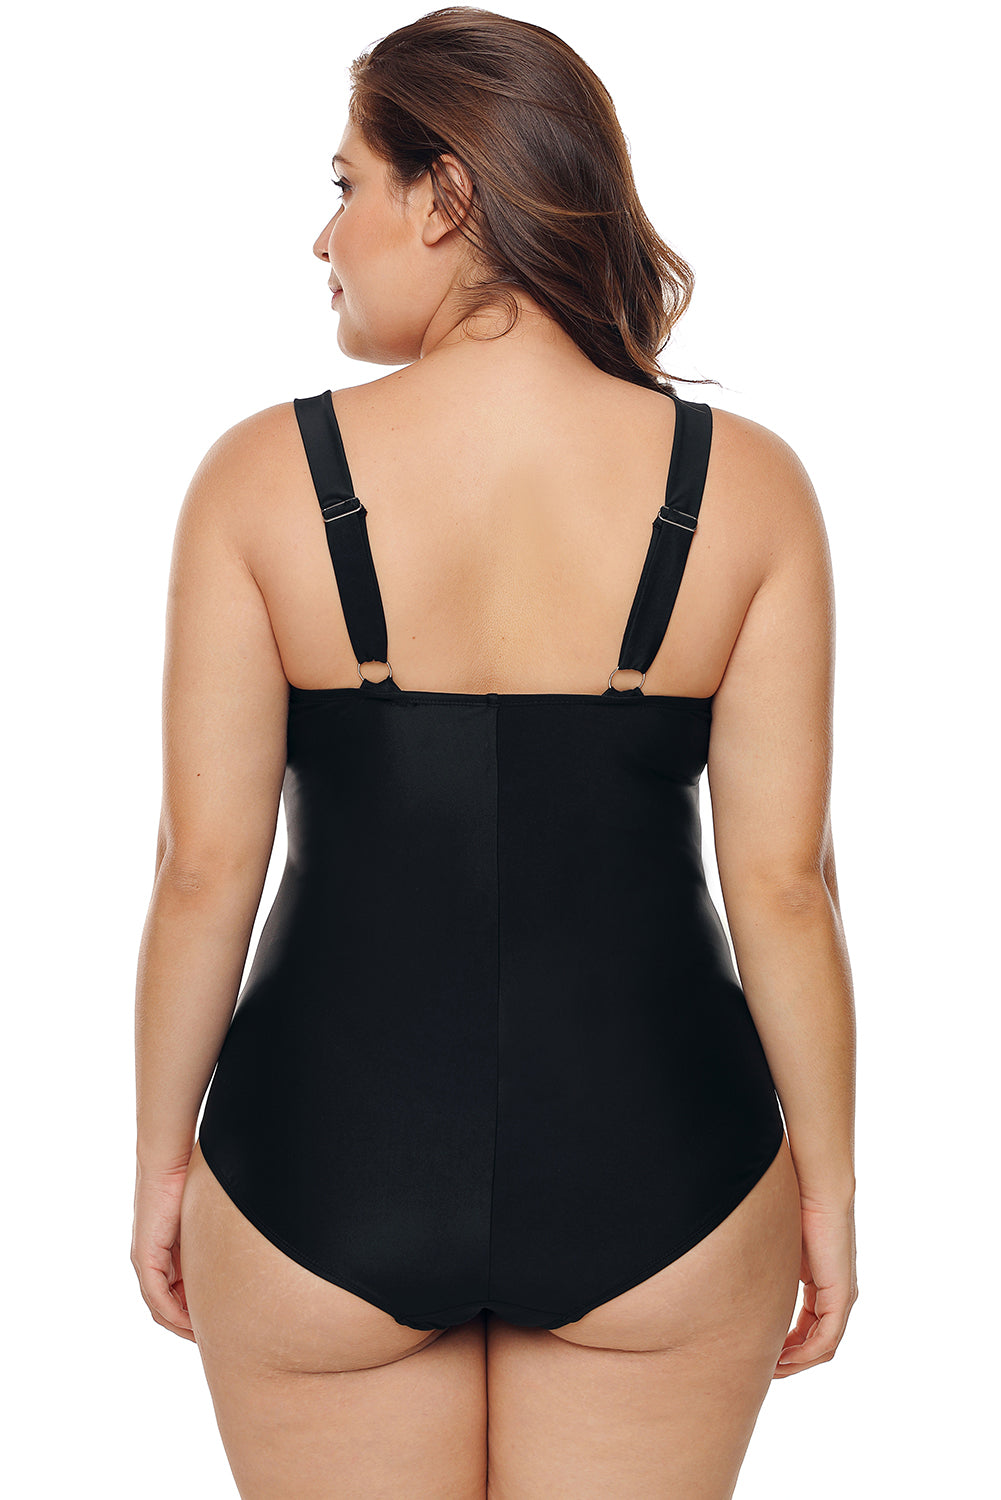 Black Hollow-out Neck  Maillot Swimwear (Available In Plus Sizes)